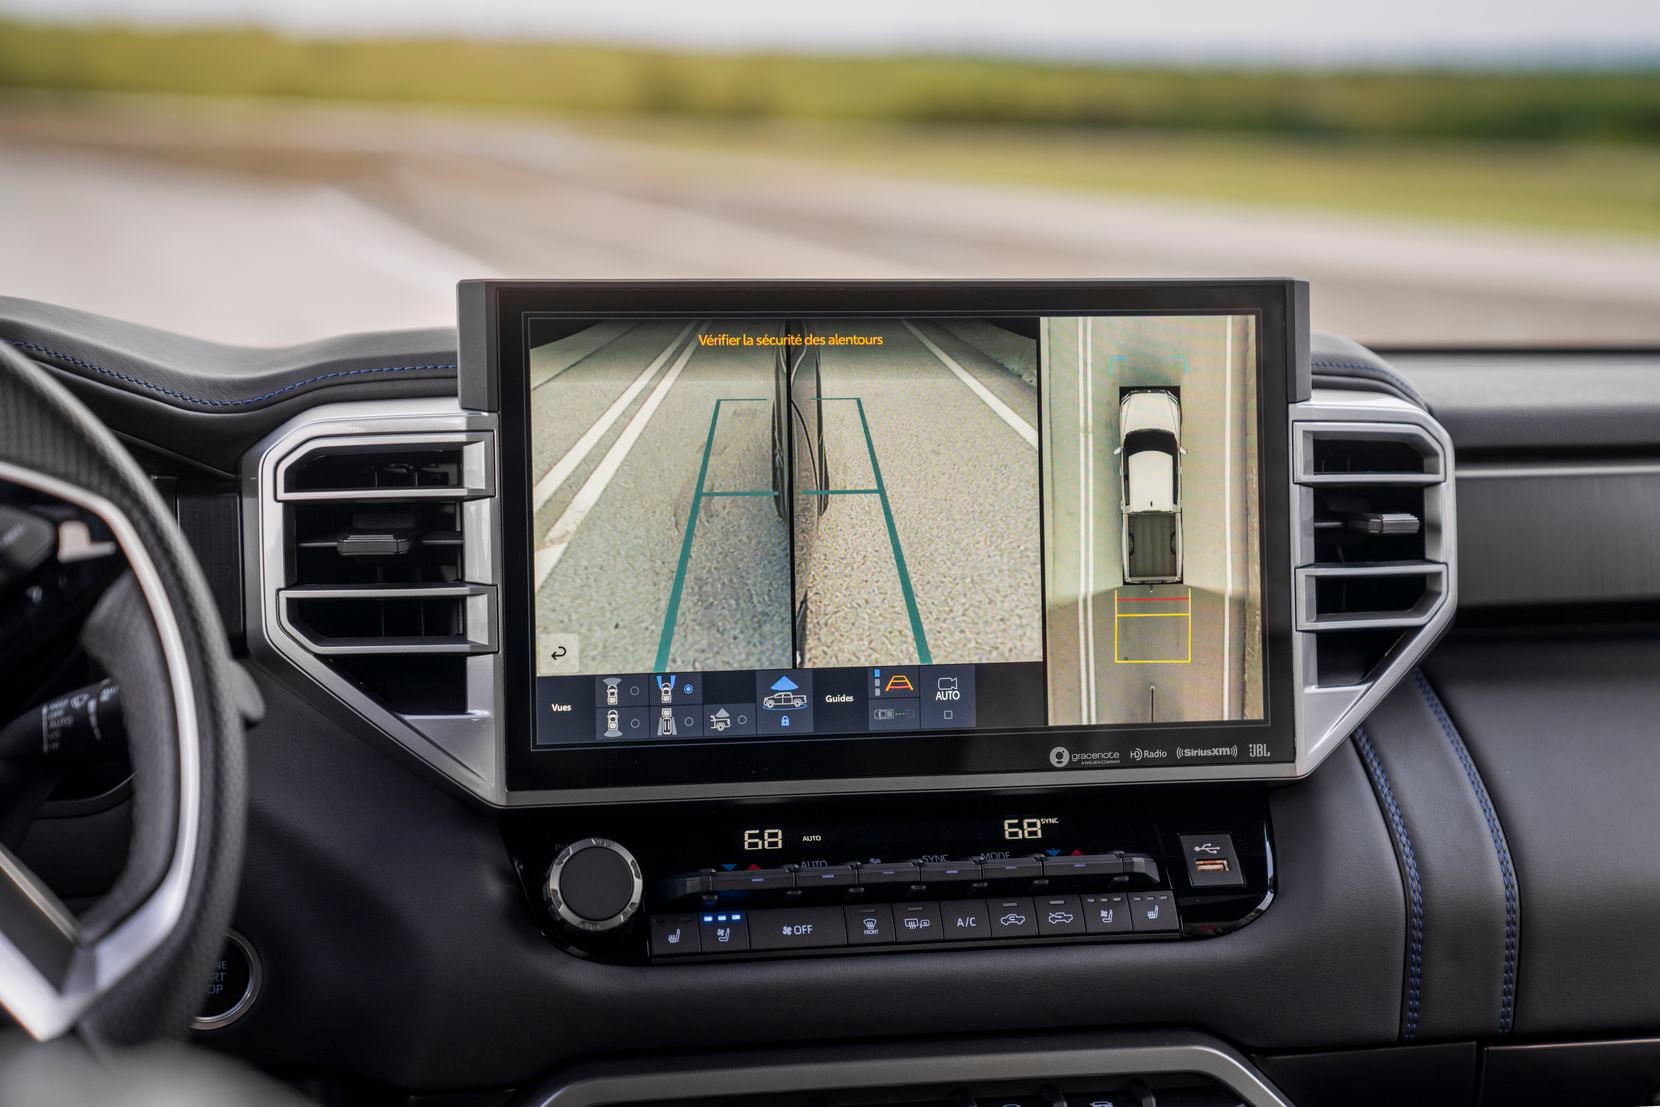 The 2022 Tundra features a 14-inch in-dash monitor.